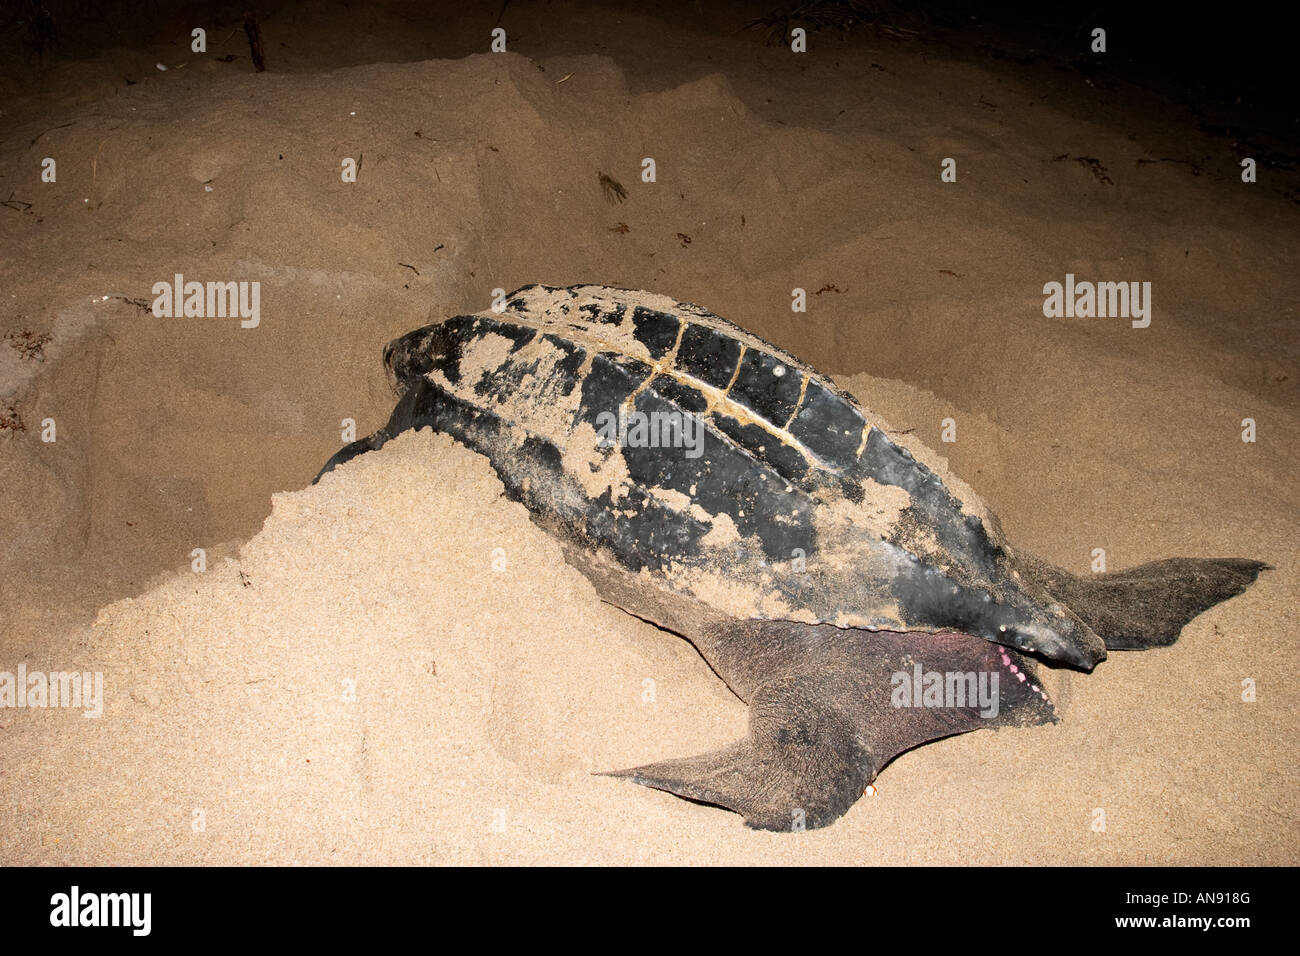 An injured adult leatherback sea turtle hit by a large boat Stock Photo